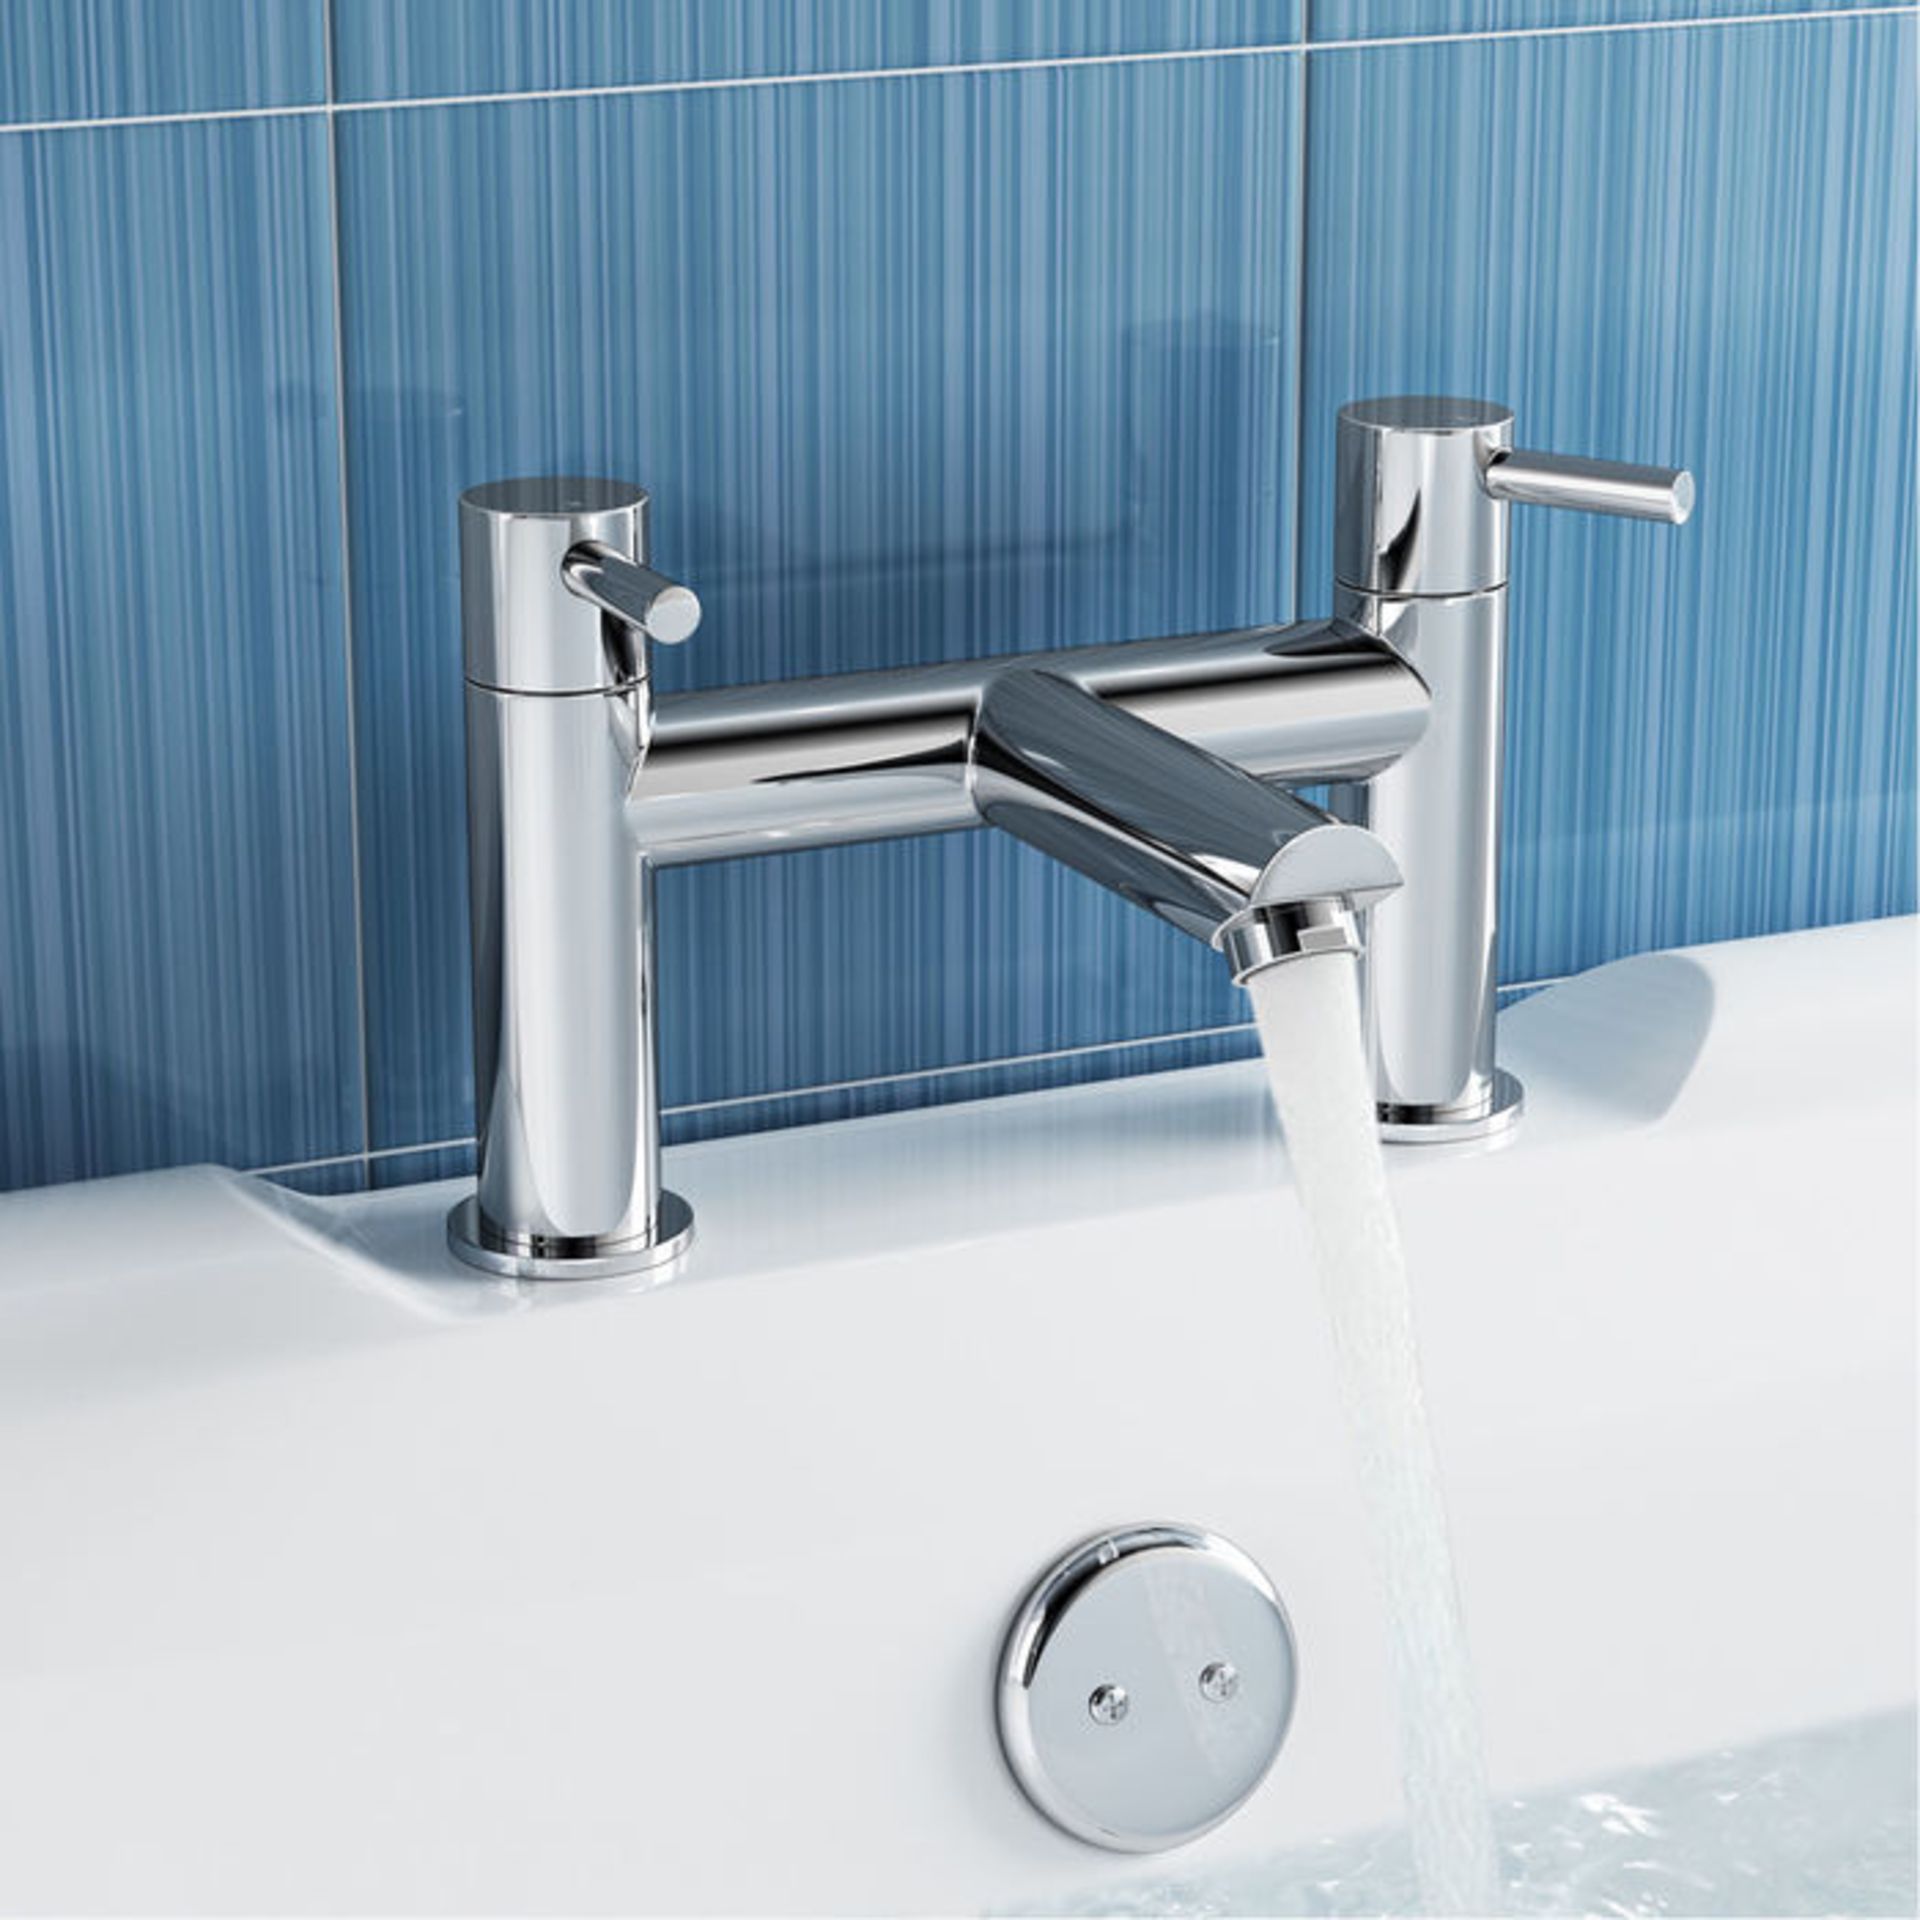 (VN48) Gladstone II Bath Filler Mixer Tap Chrome Plated Solid Brass 1/4 turn solid brass valve